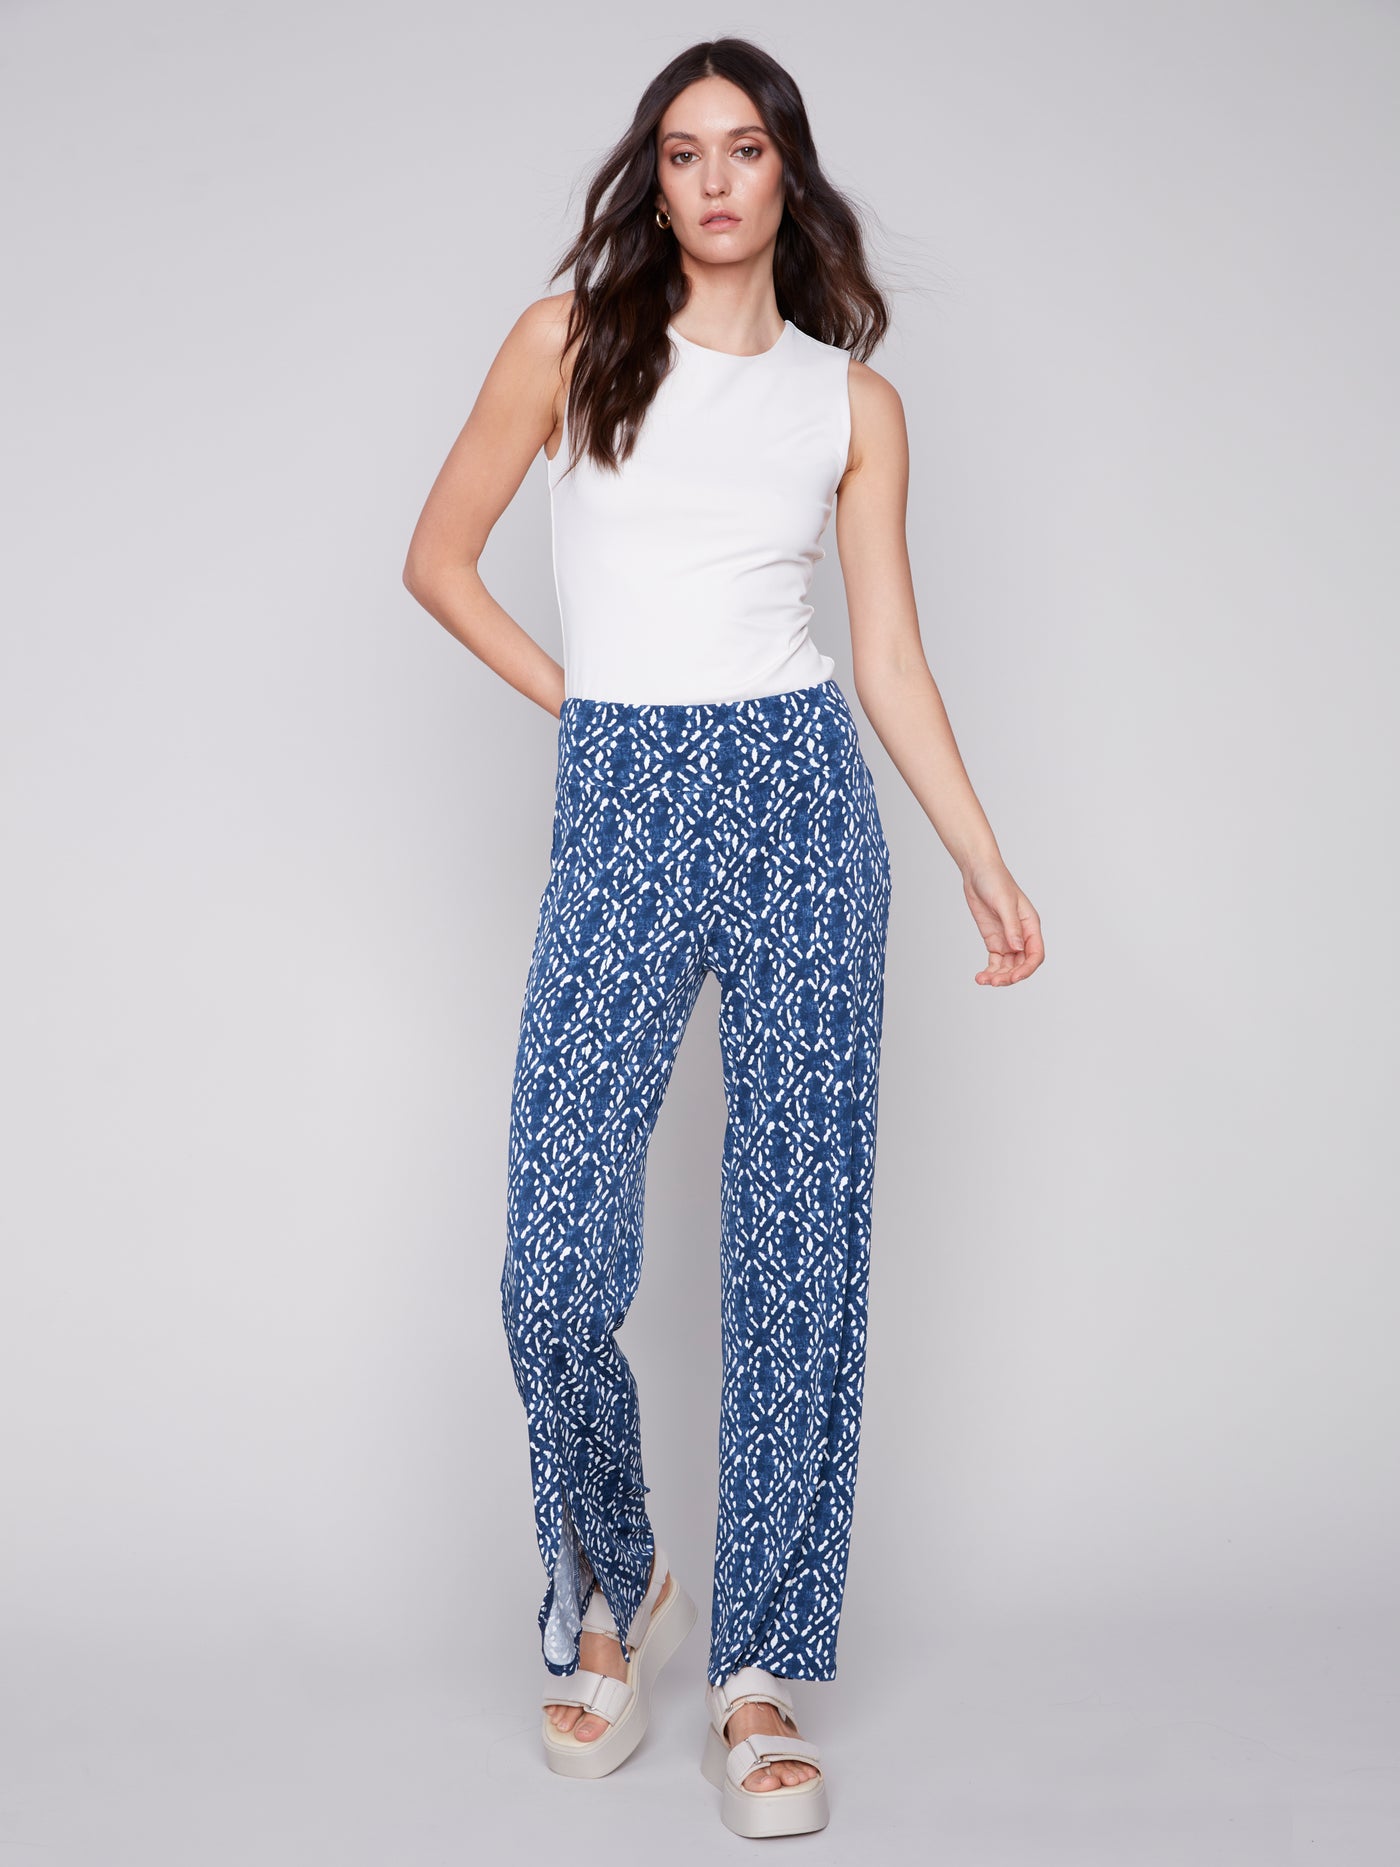 Charlie B Printed Wide Leg Pants with Front Slits 